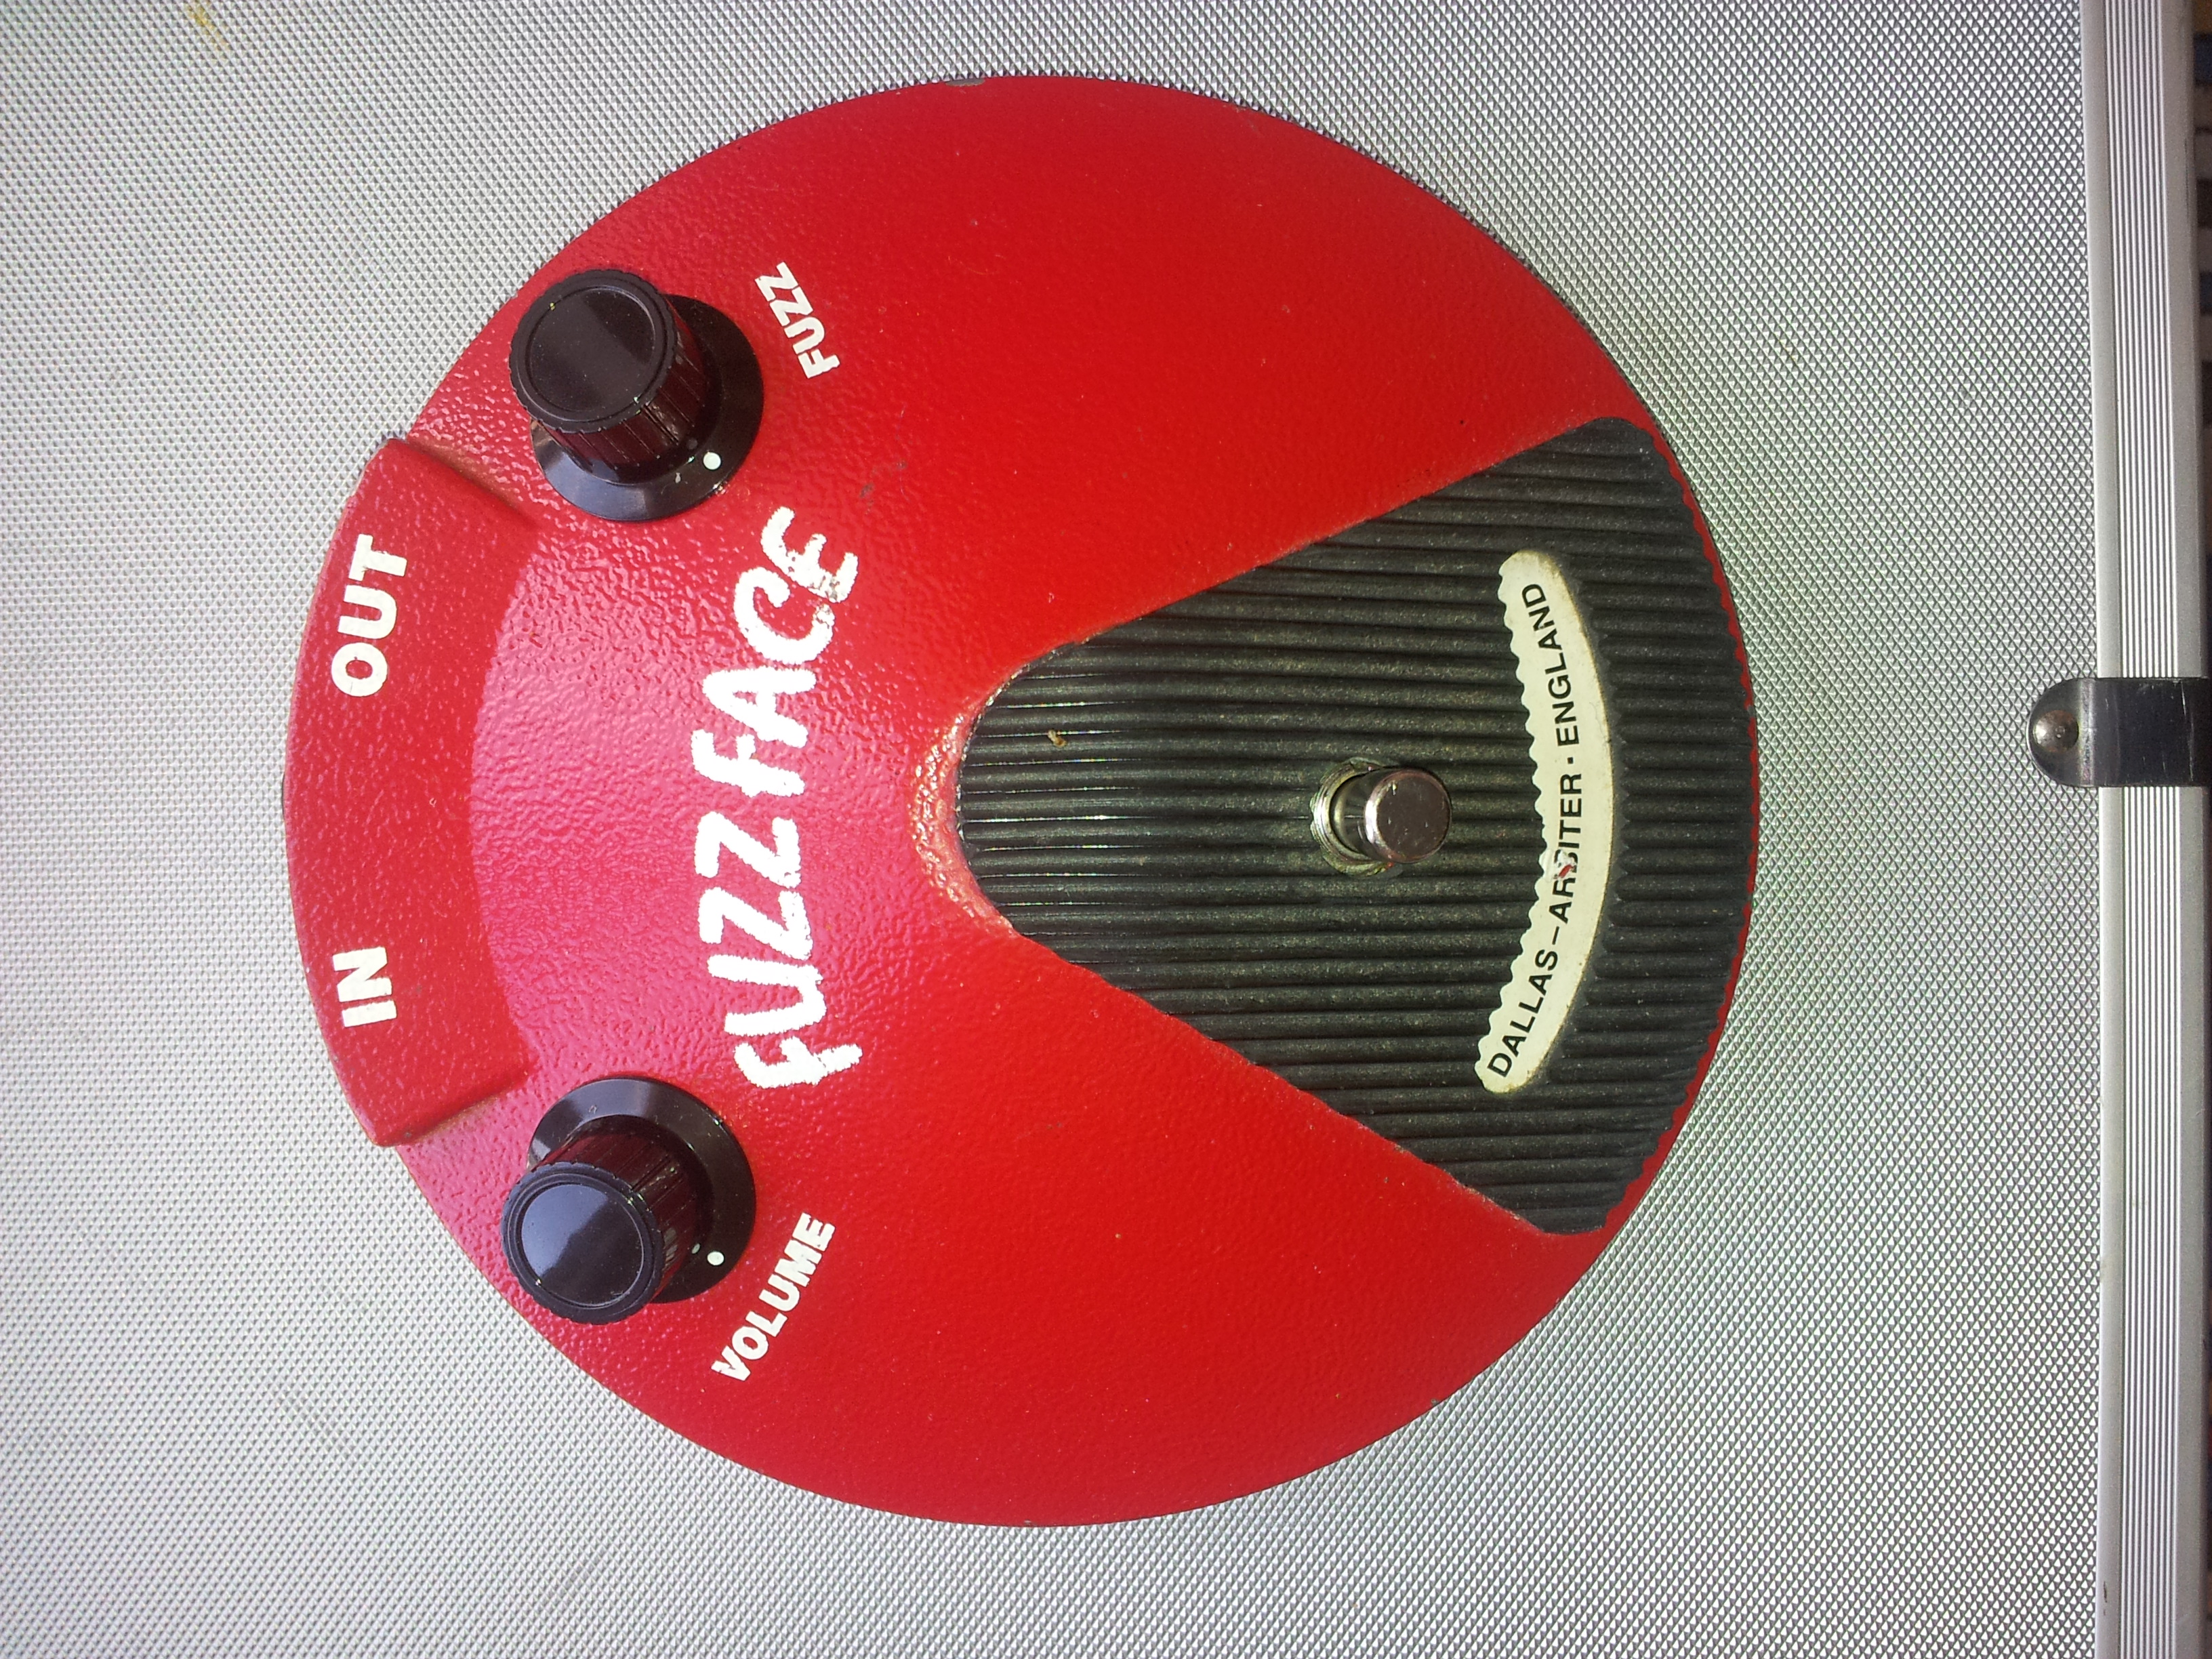 Dunlop Fuzz Face Serial Numbers